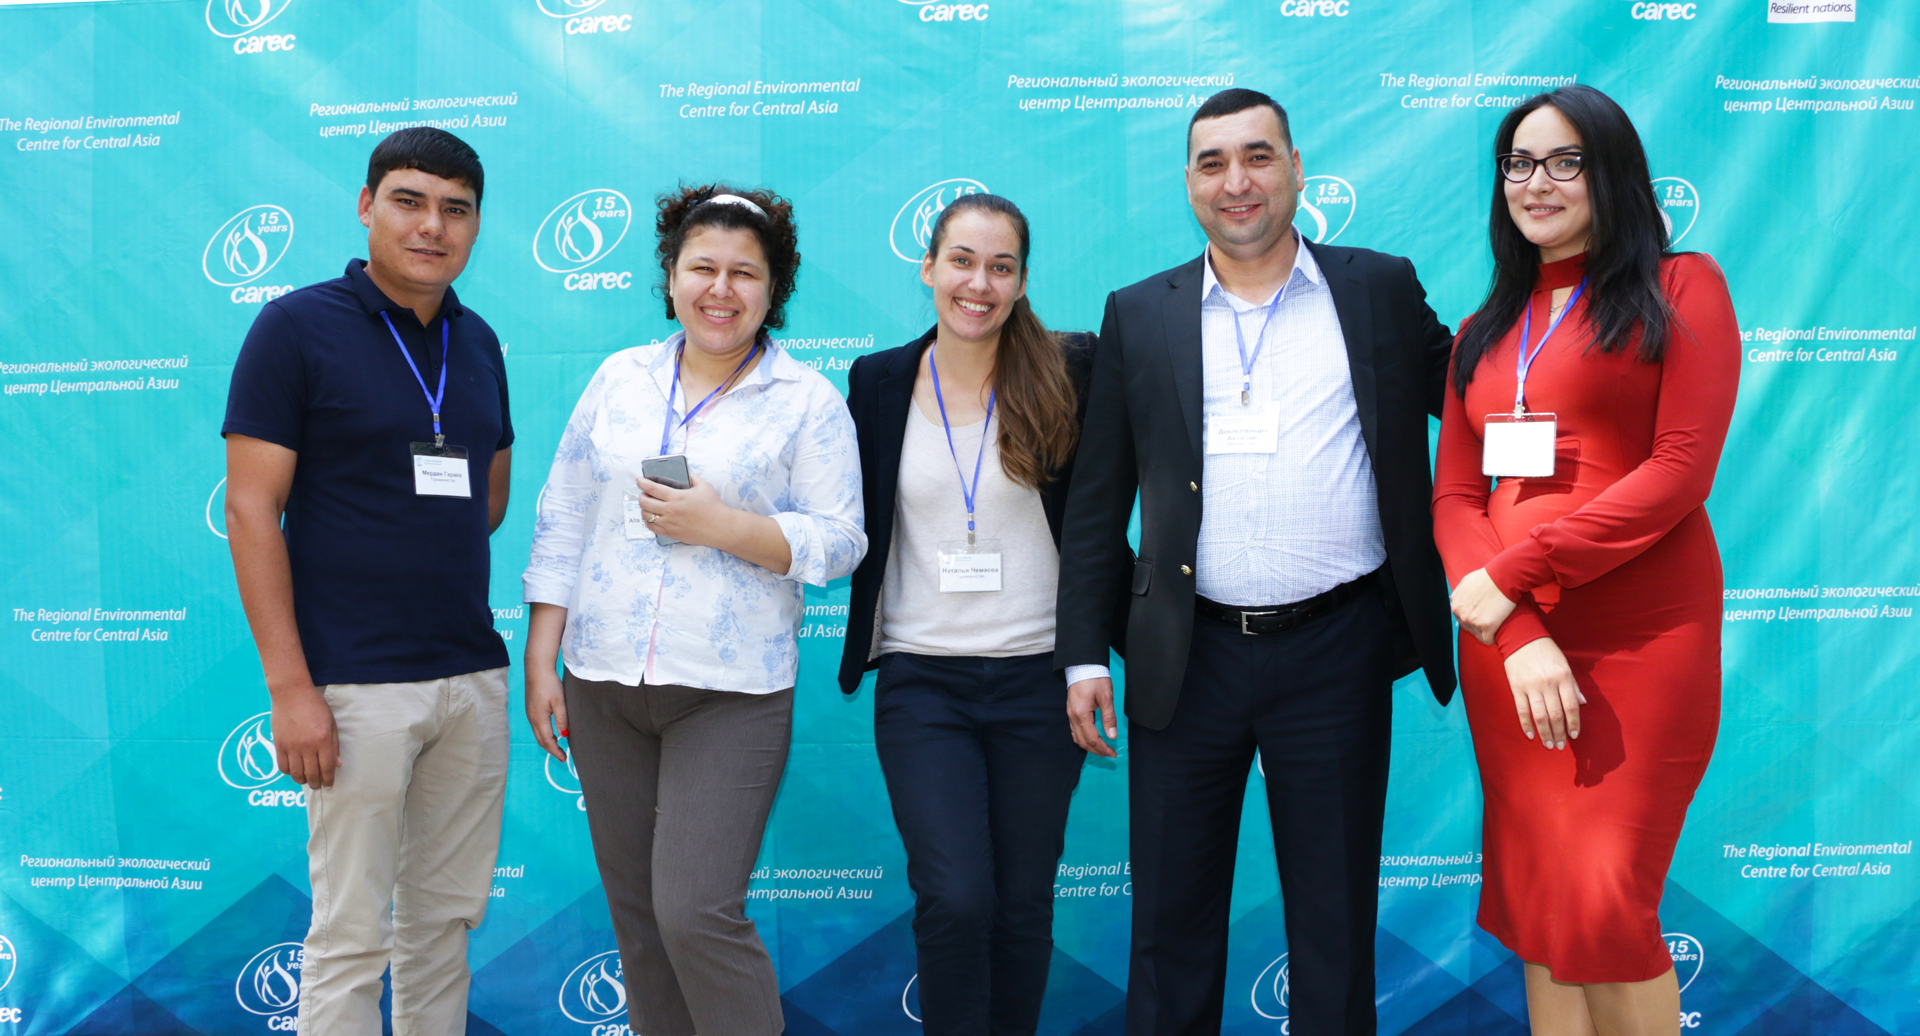 "It’s a priceless experience,” a graduate speaks about the Central Asian Leadership Programme